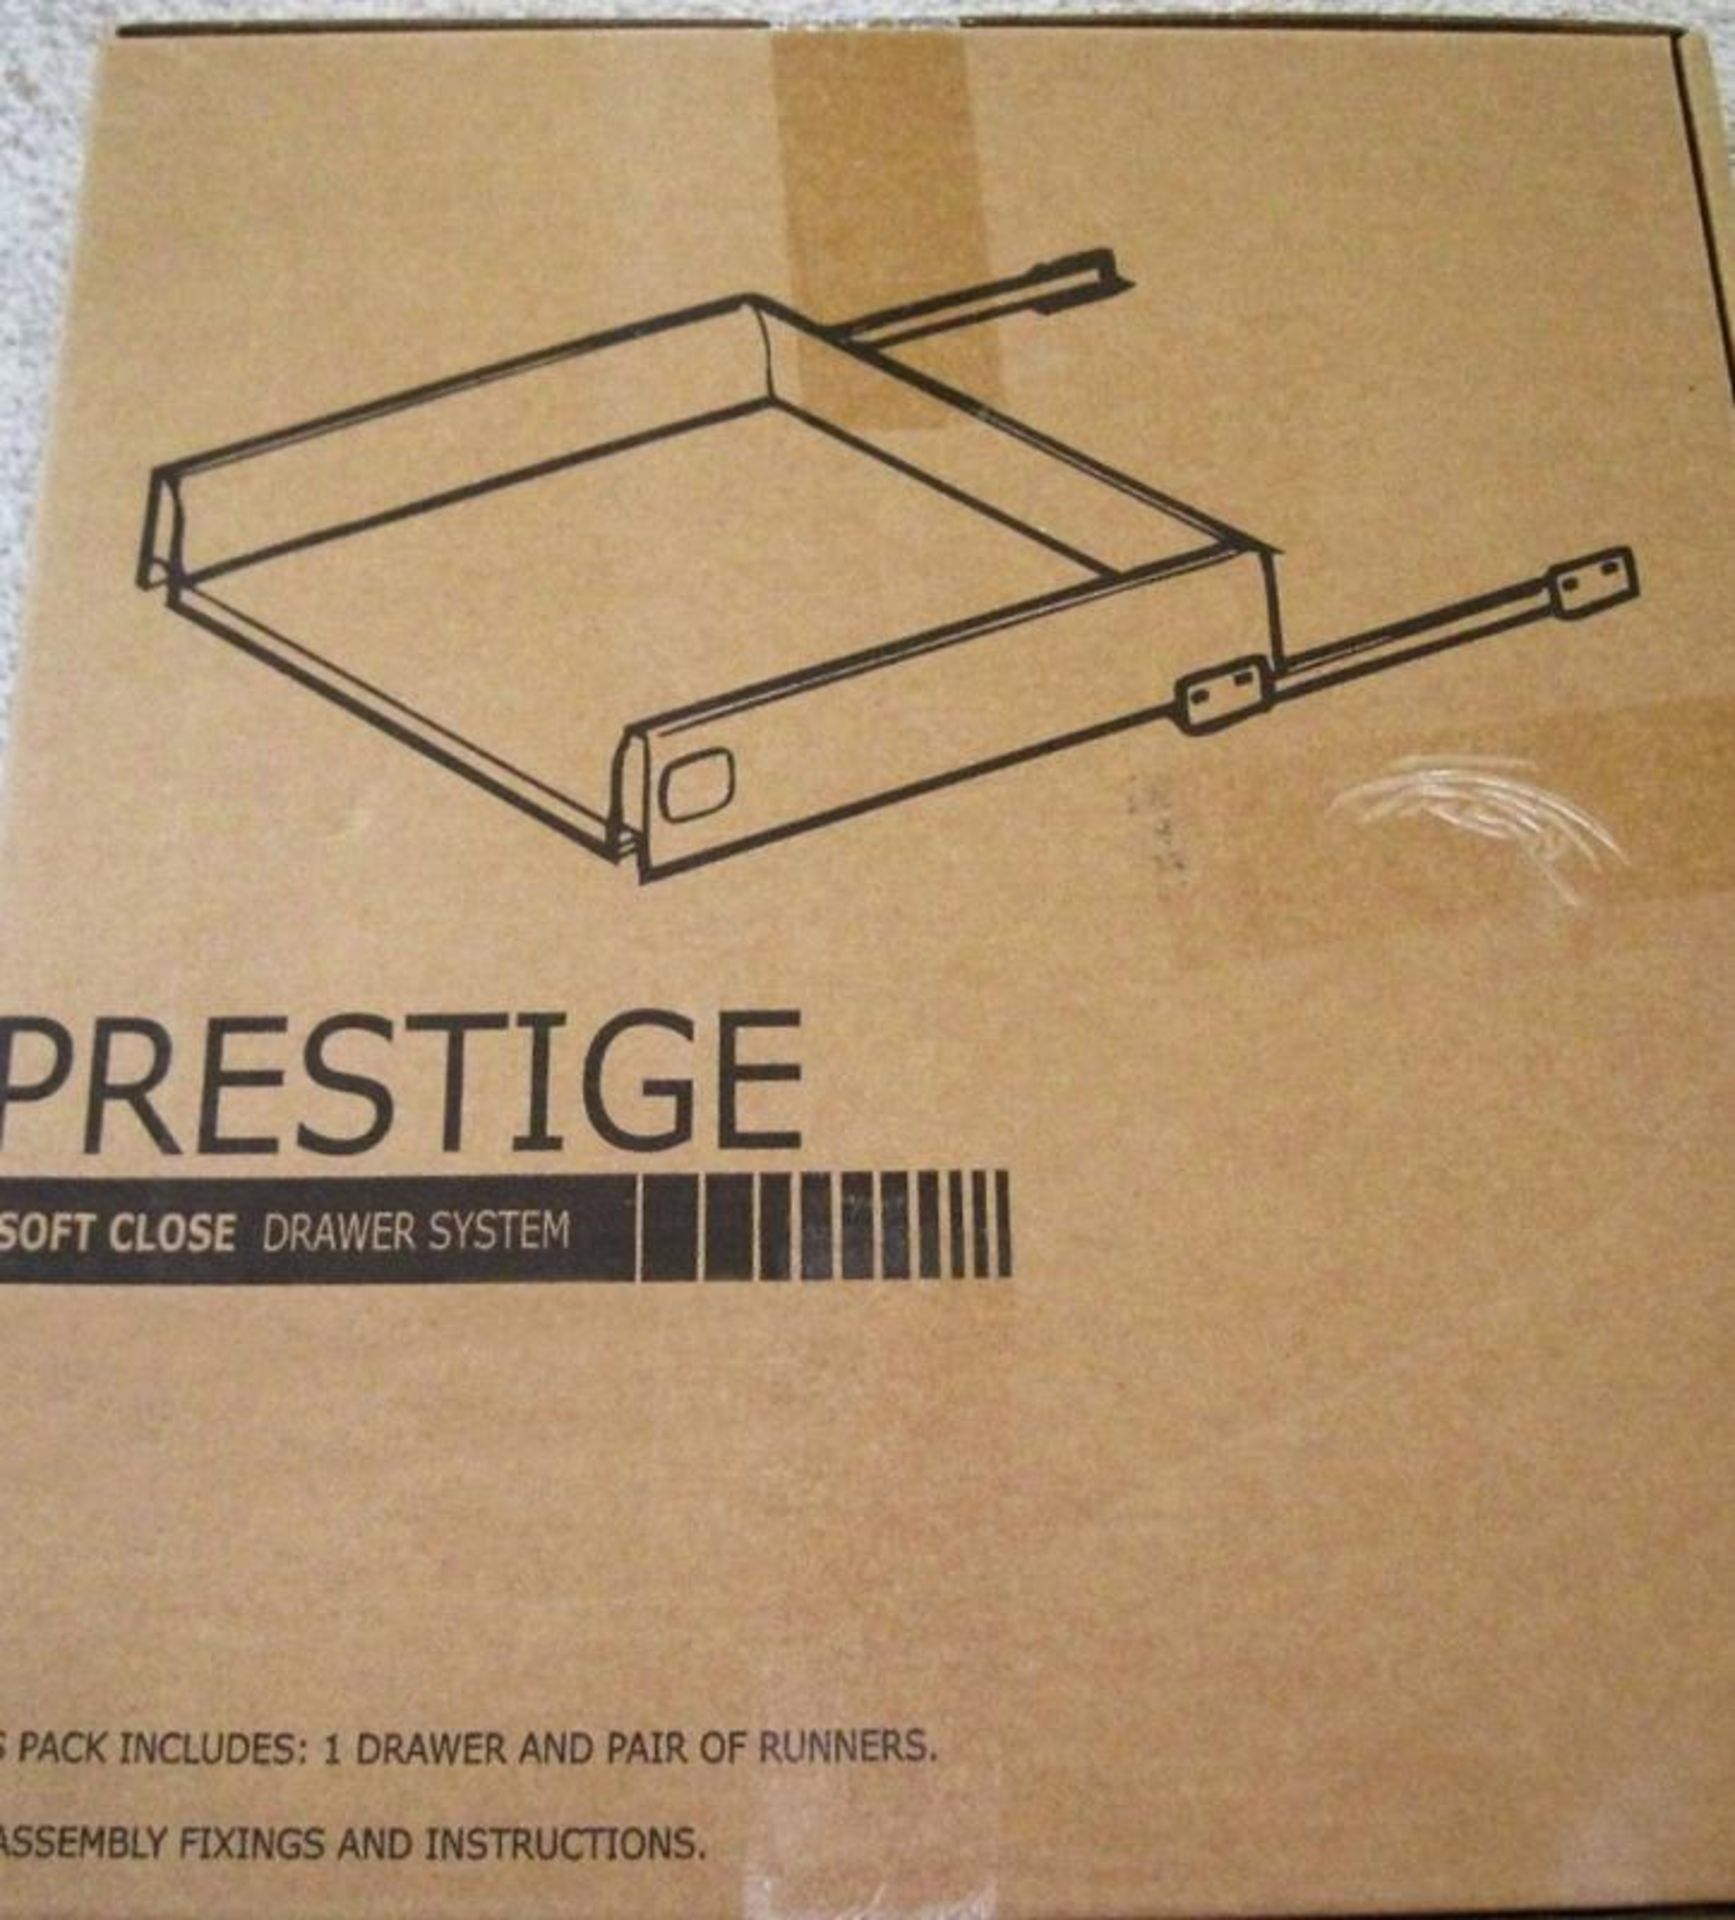 2 x 300mm Soft Close Kitchen Drawer Packs - B&Q Prestige - Brand New Stock - Features Include - Image 2 of 2